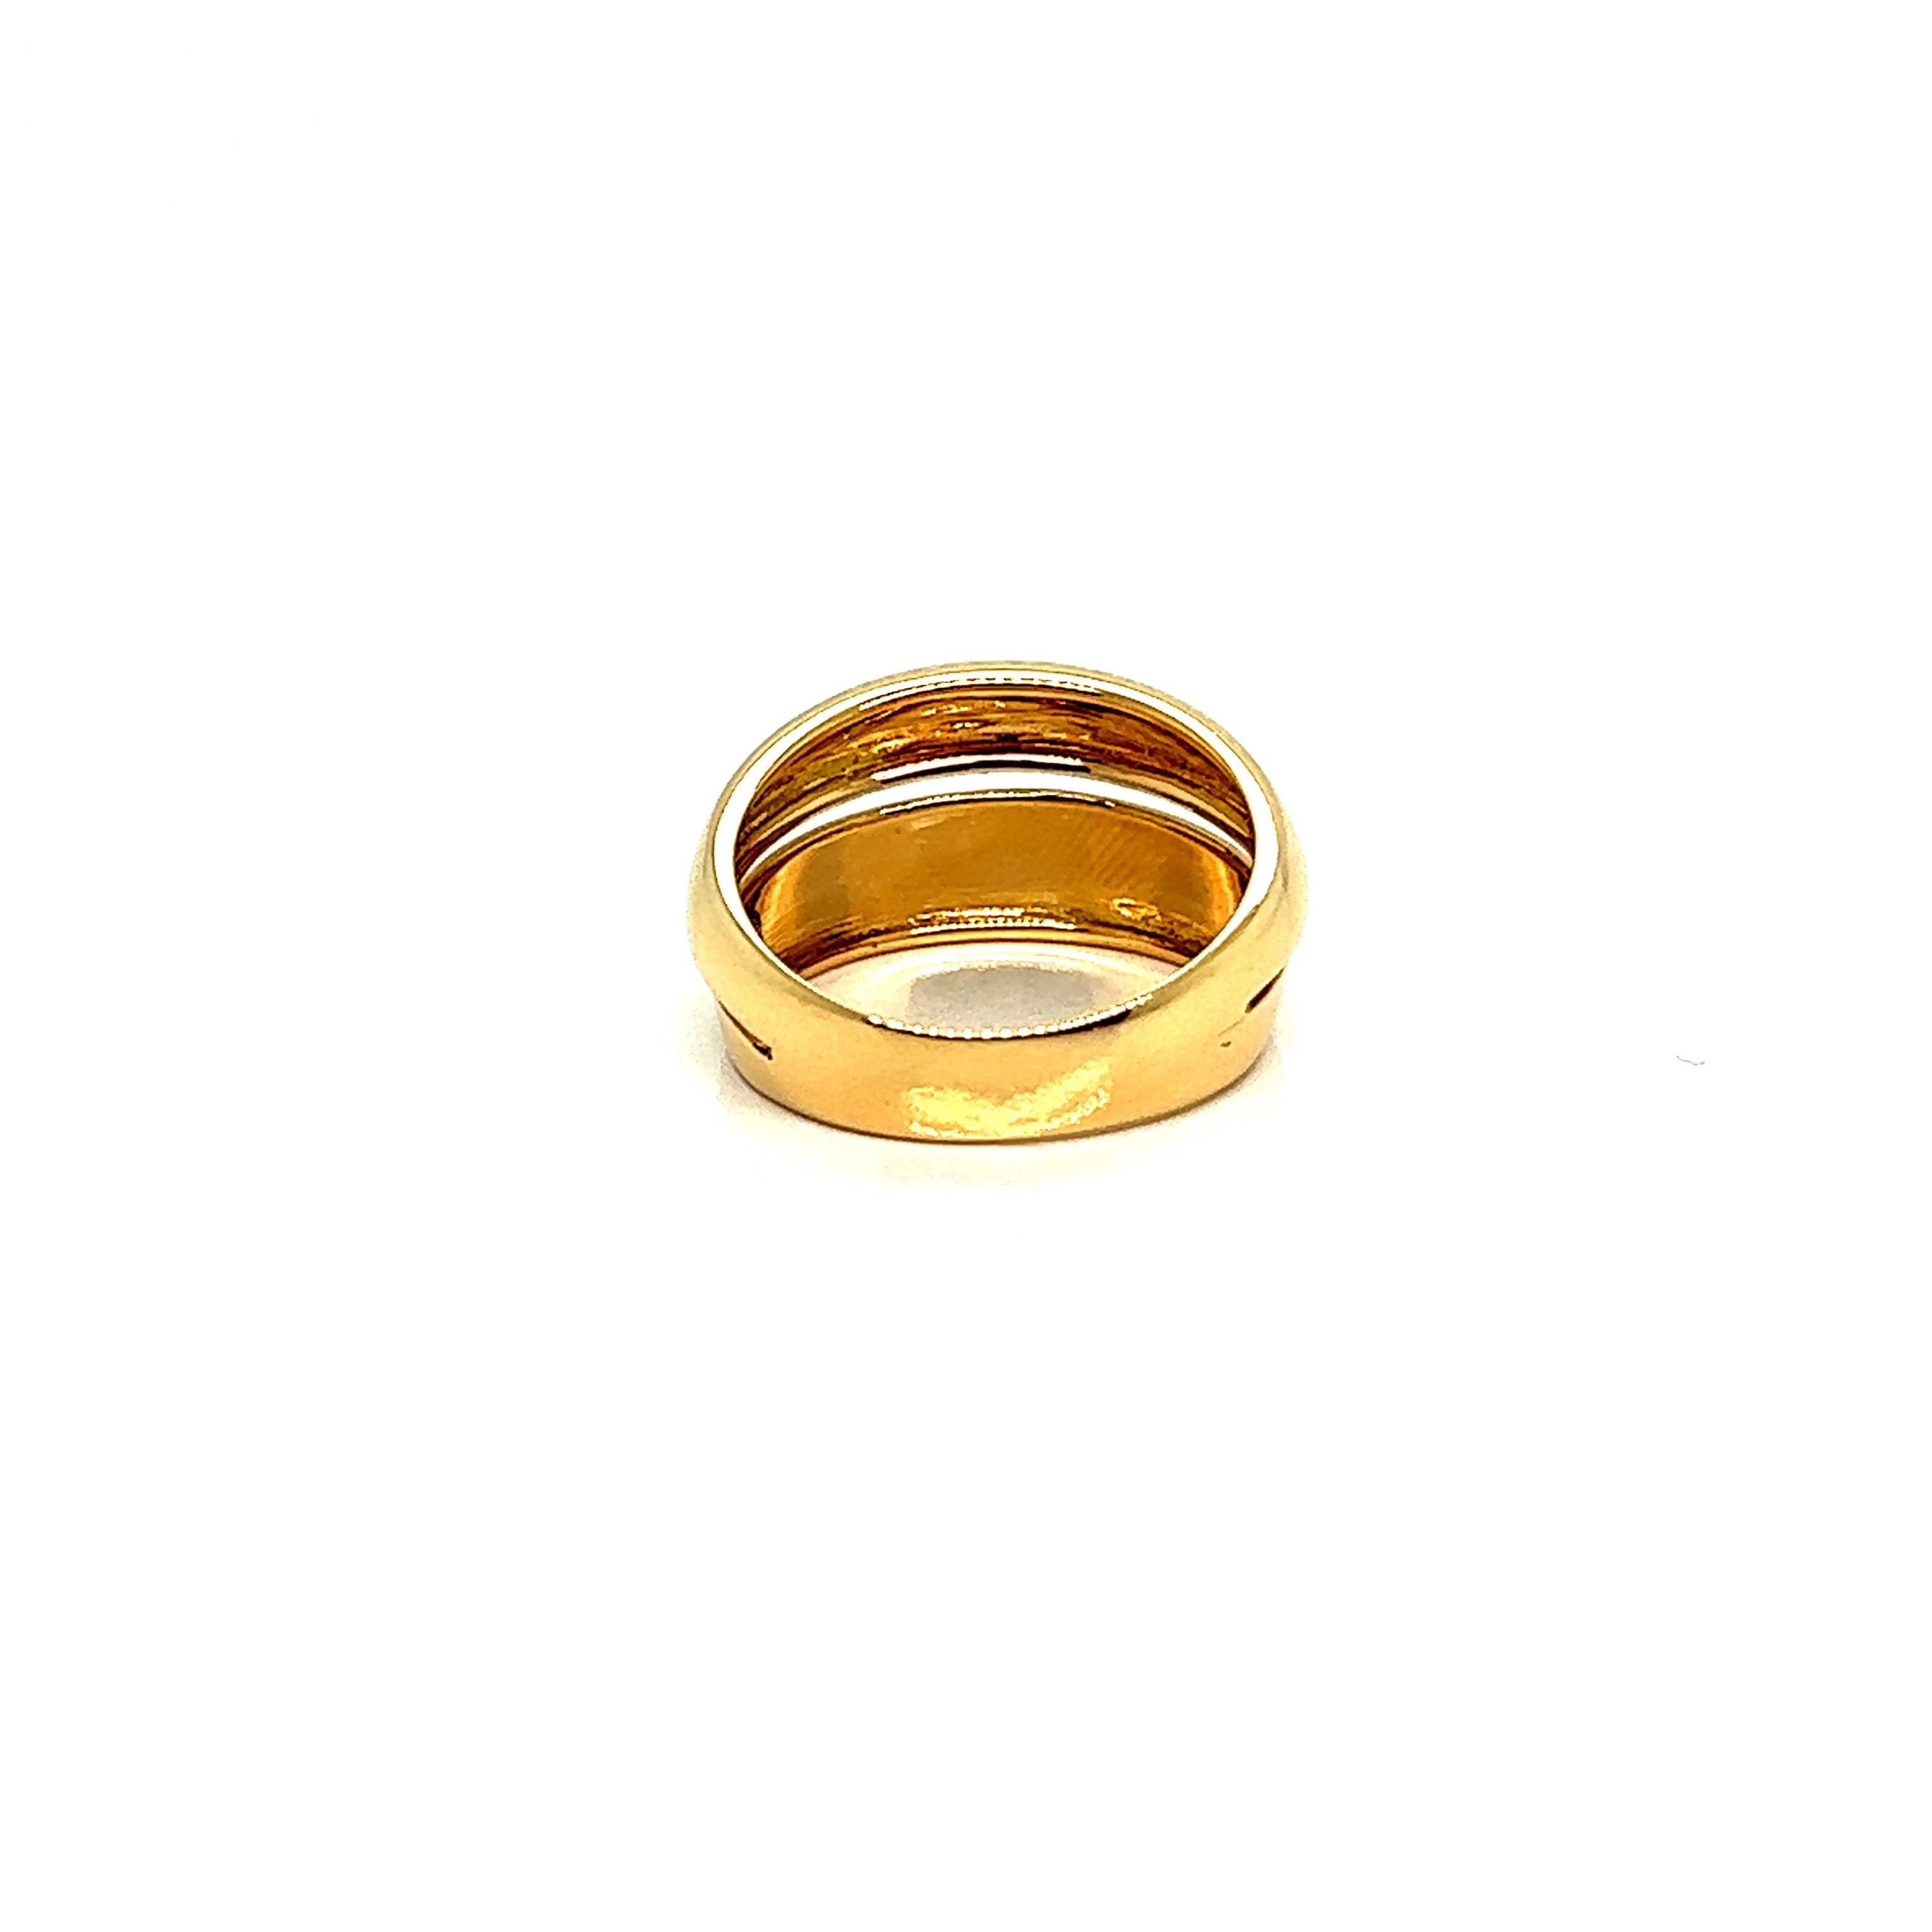 French Ring with Middle Opening 18 Carat Yellow Gold 4